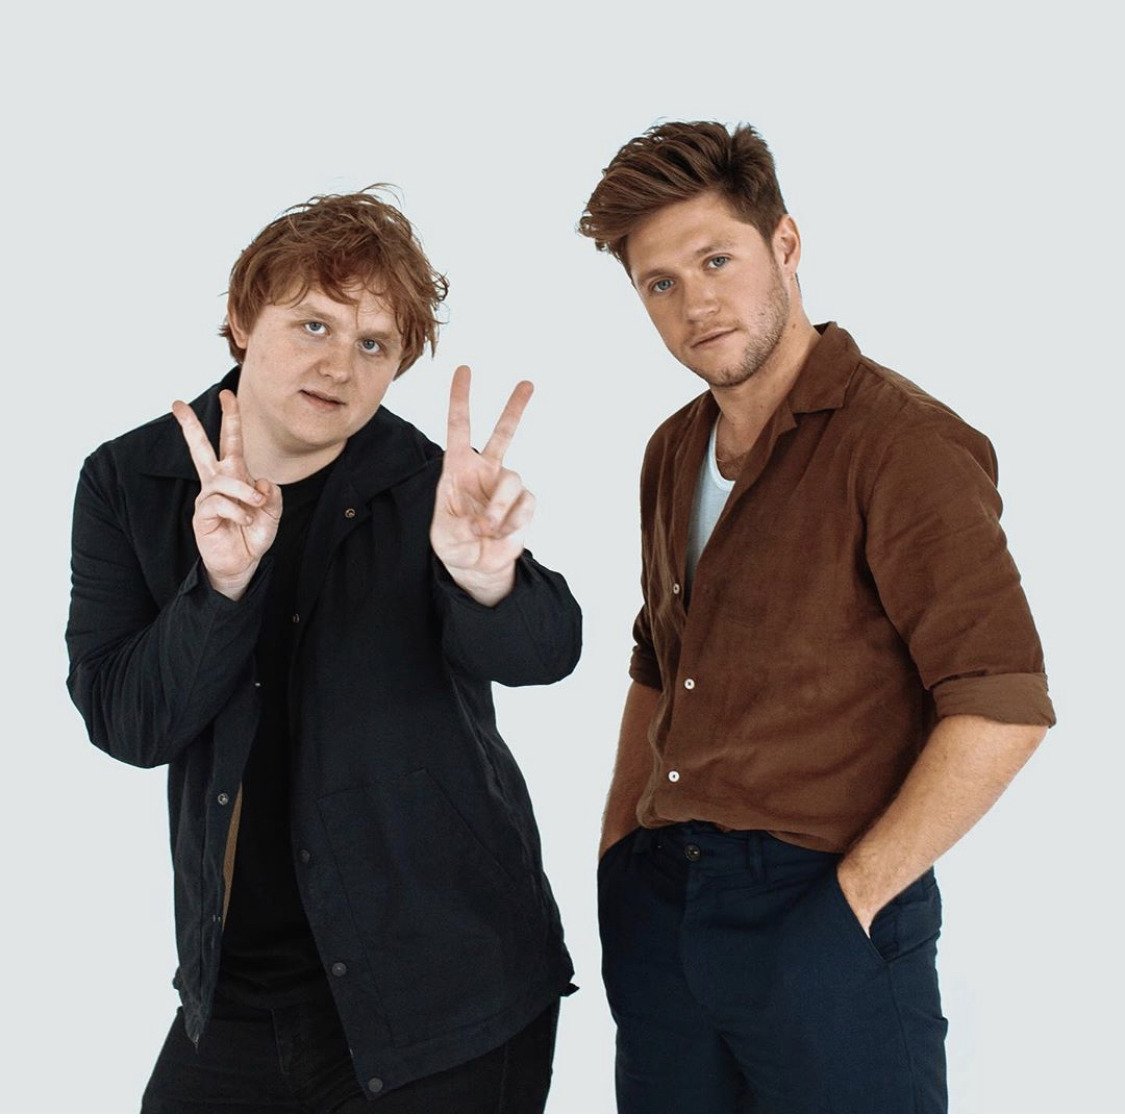 A thread - Small Talk with Niall Horan and Lewis Capaldi (Newis) 